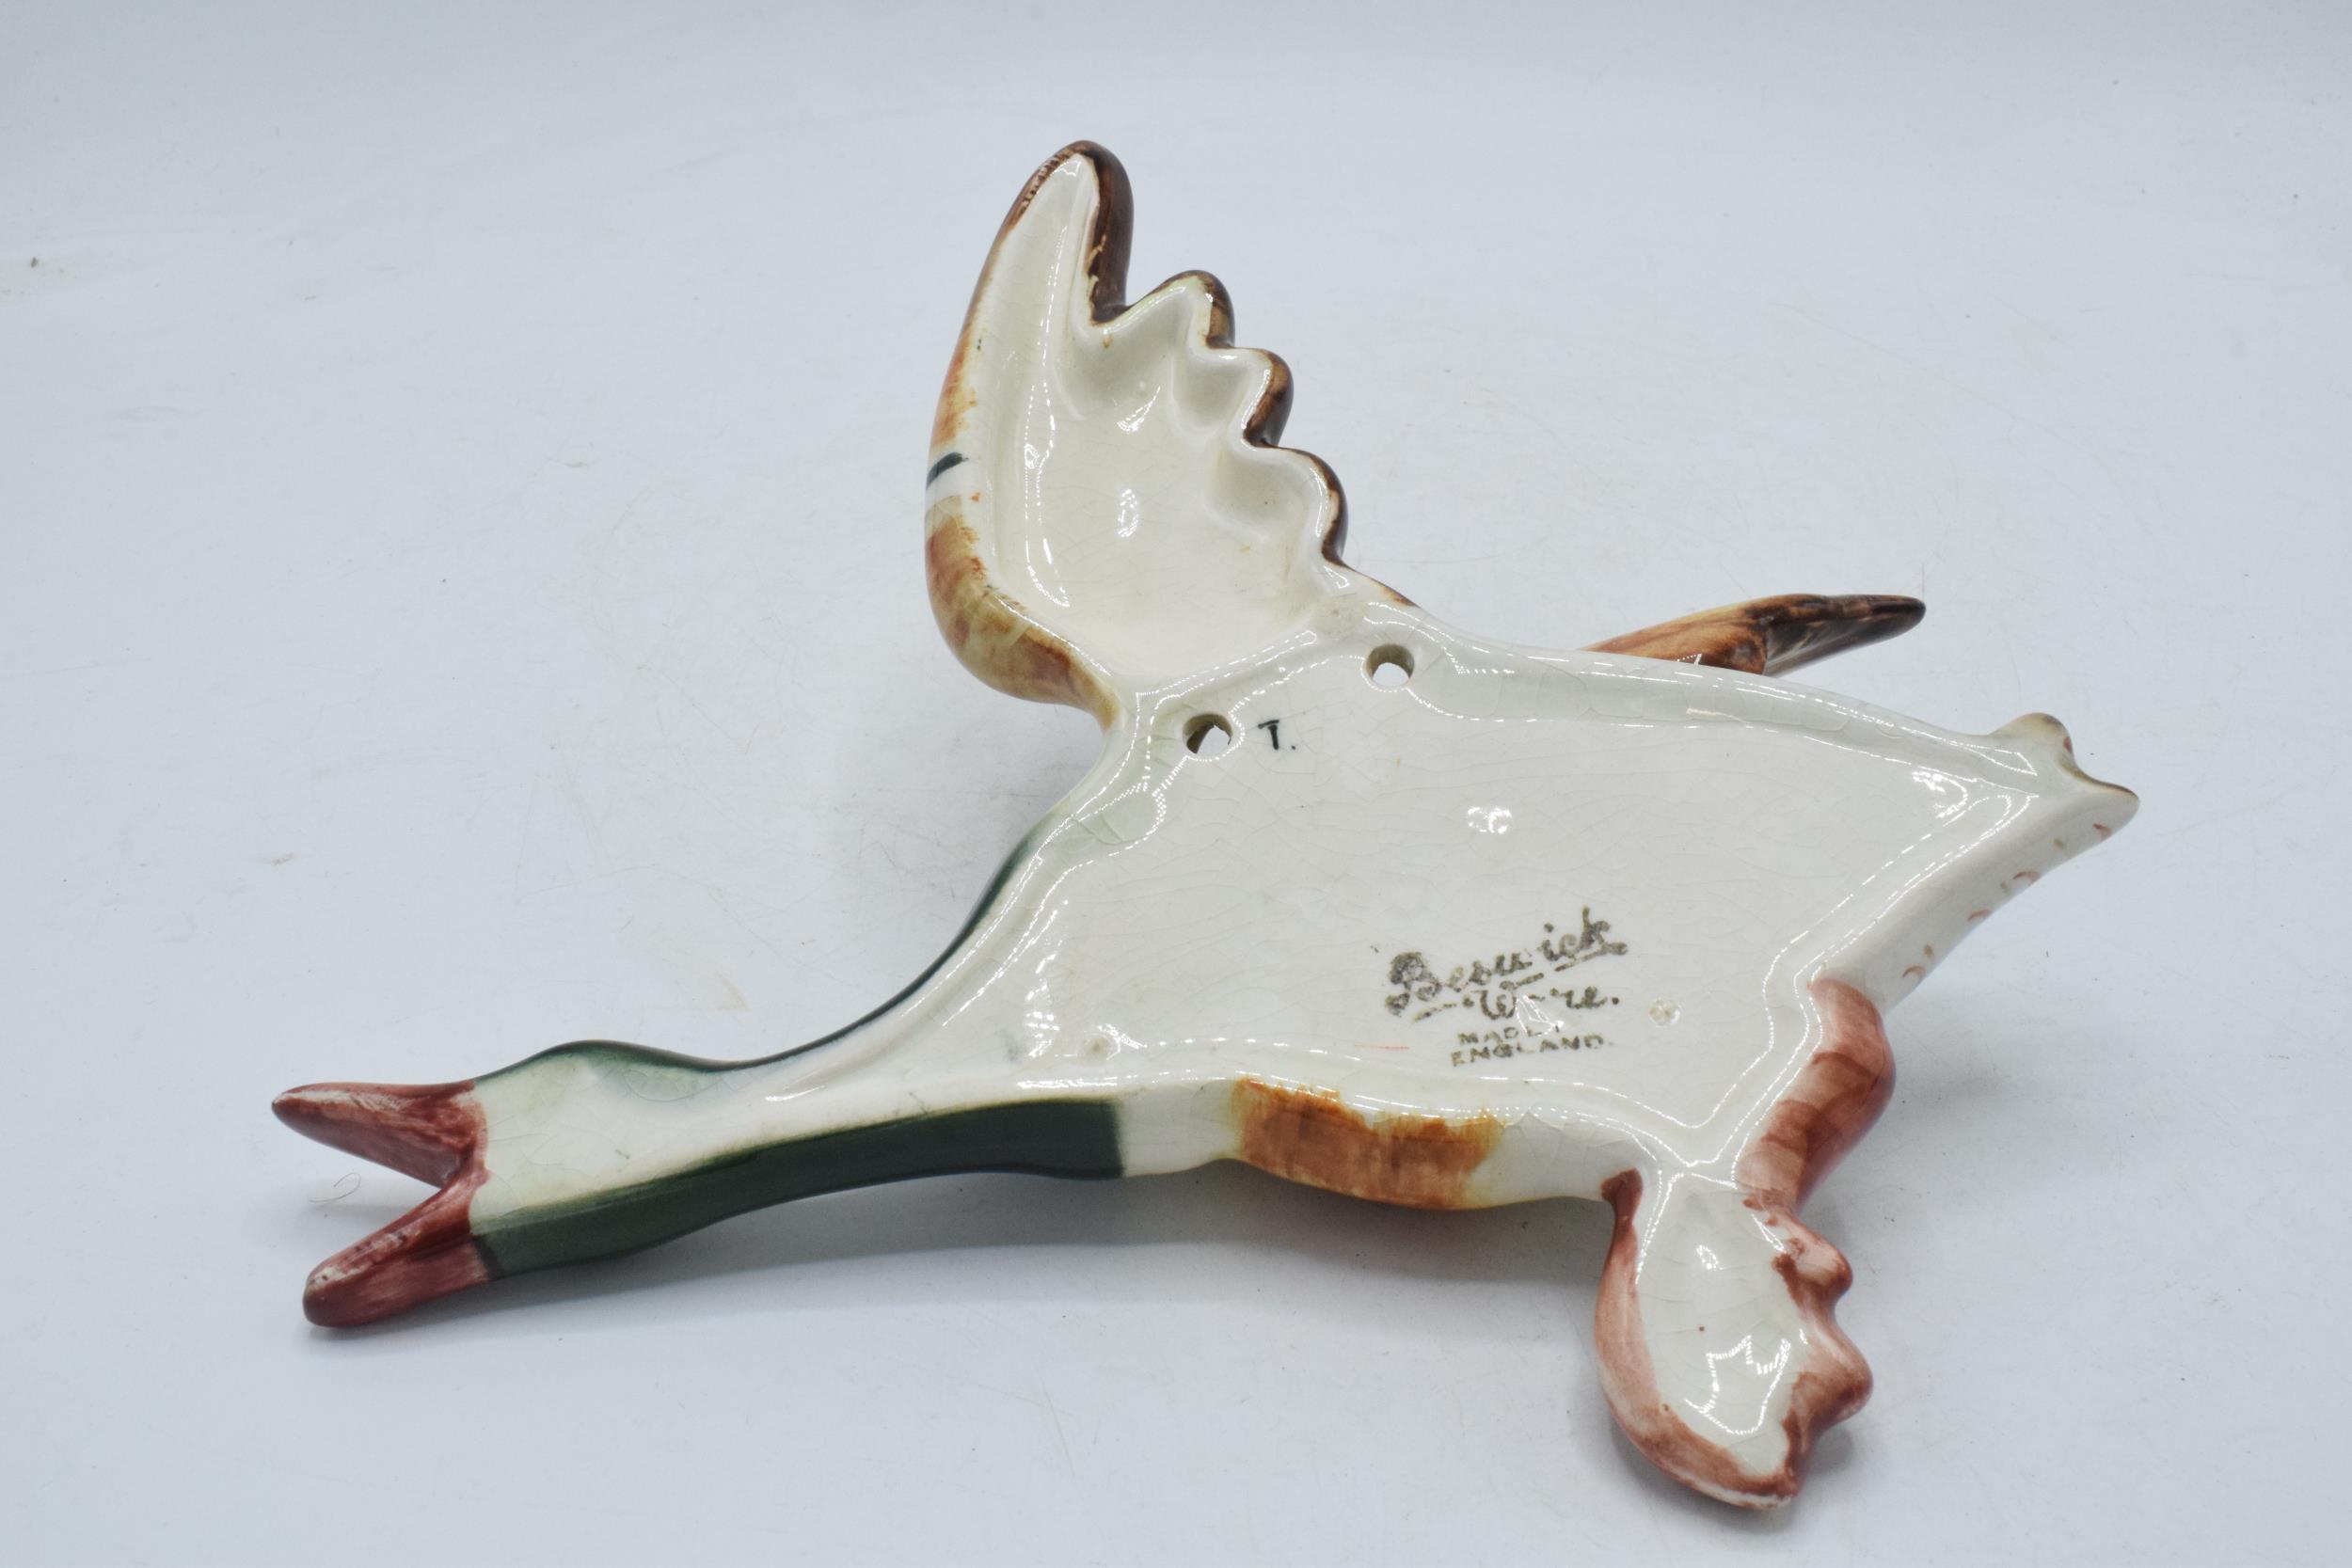 Beswick Flying Shelduck wall plaque 596-2. In good condition with no obvious damage or - Image 2 of 3